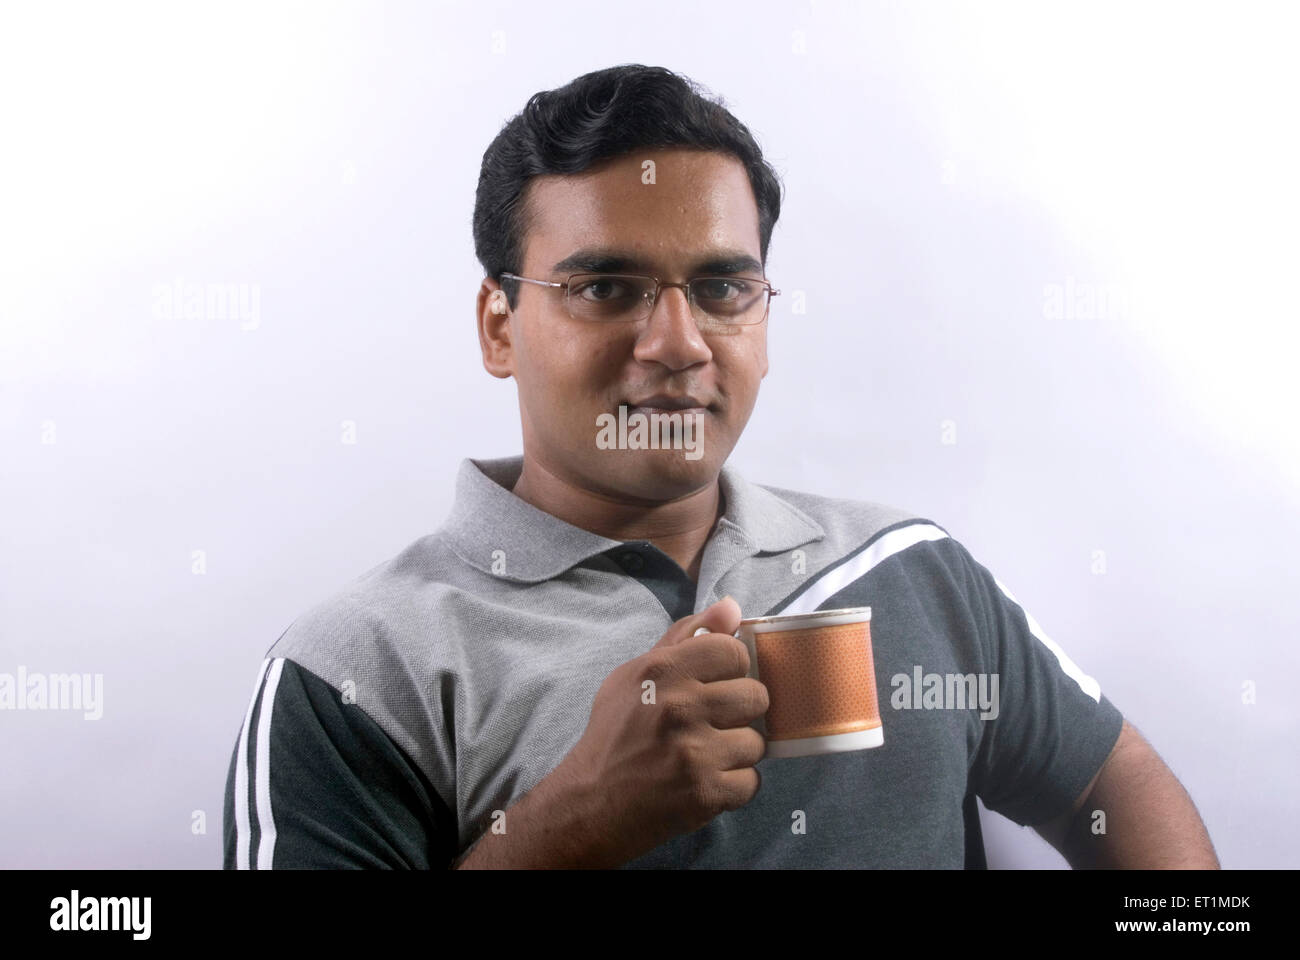 Young man drinking tea or coffee from mug ; India MR#556 Stock Photo